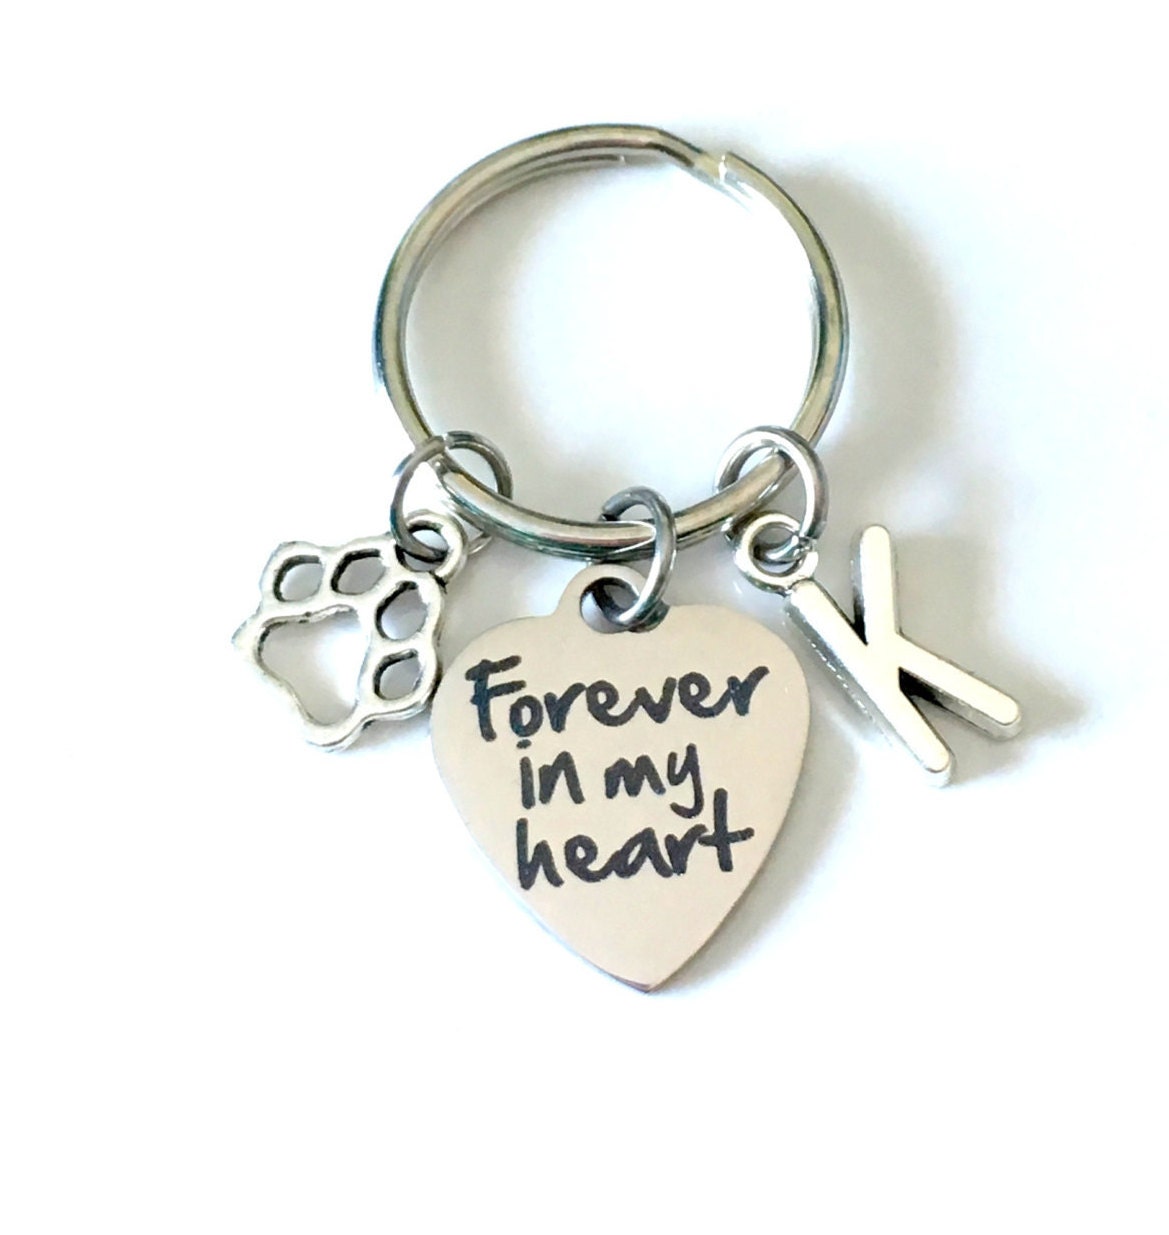 SALE Loss of Dog Sympathy Gift Forever in my Heart Keychain